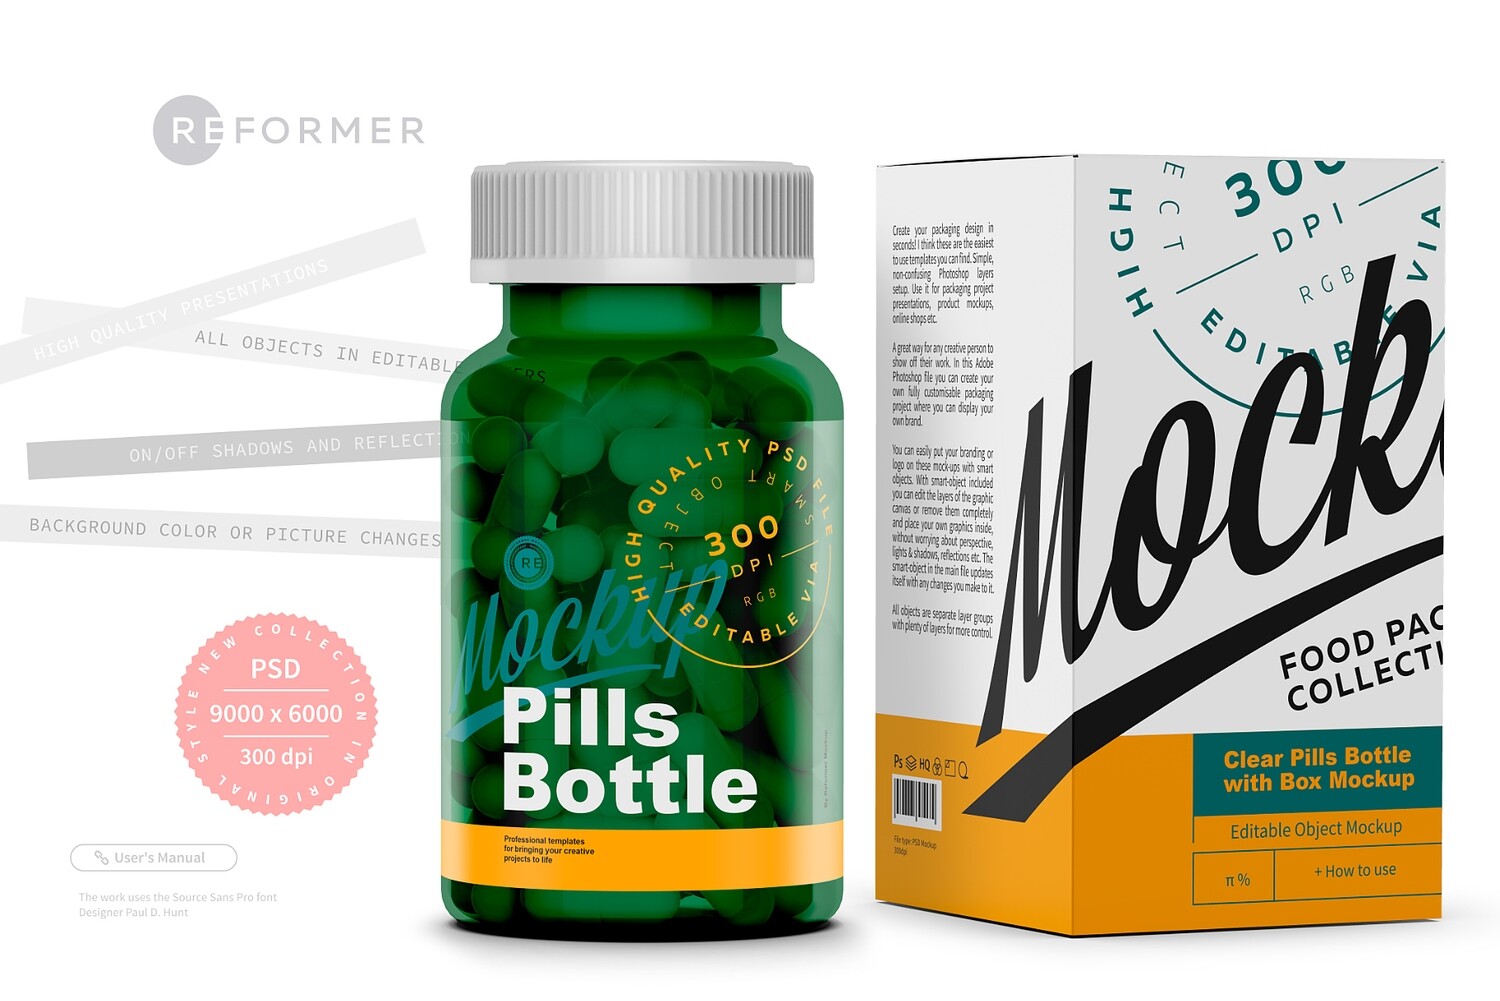 Green Pills Bottle with Box Mockup